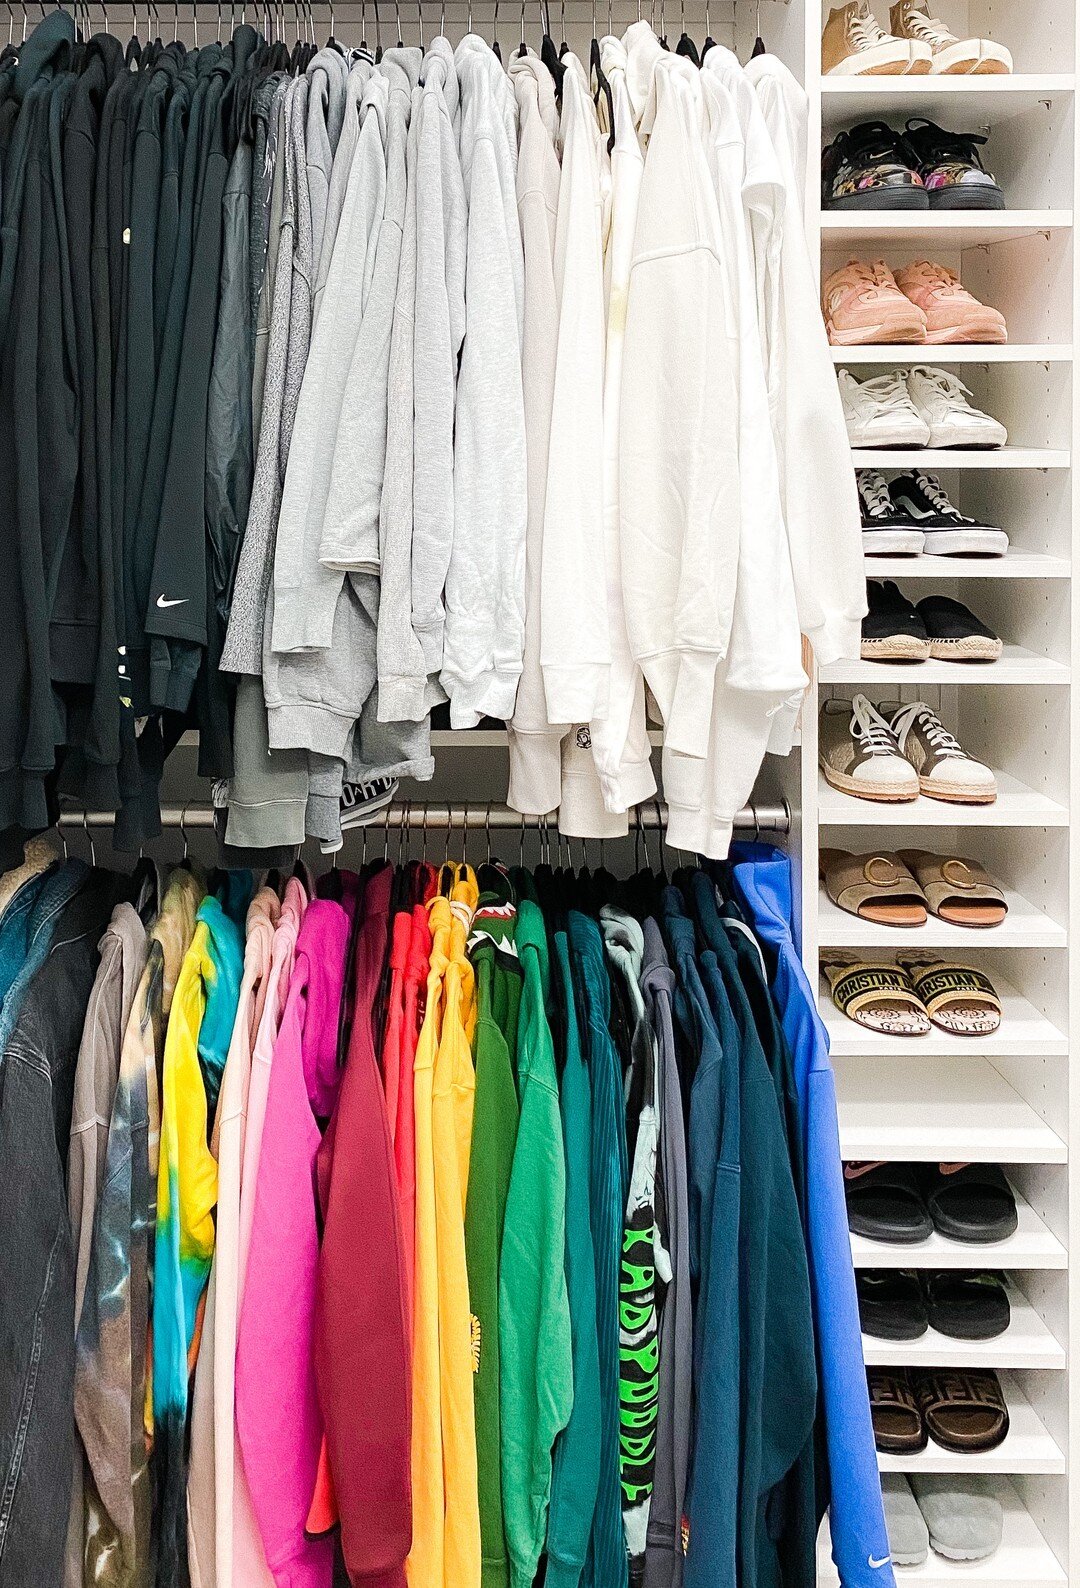 Here&rsquo;s the simplest way to organize your closet... 🌈 by color! We love separating items within a category, such as tops, into color coordinated sections. This makes it easy to plan your outfits and keep your closet clean and organized. ⁣
Will 